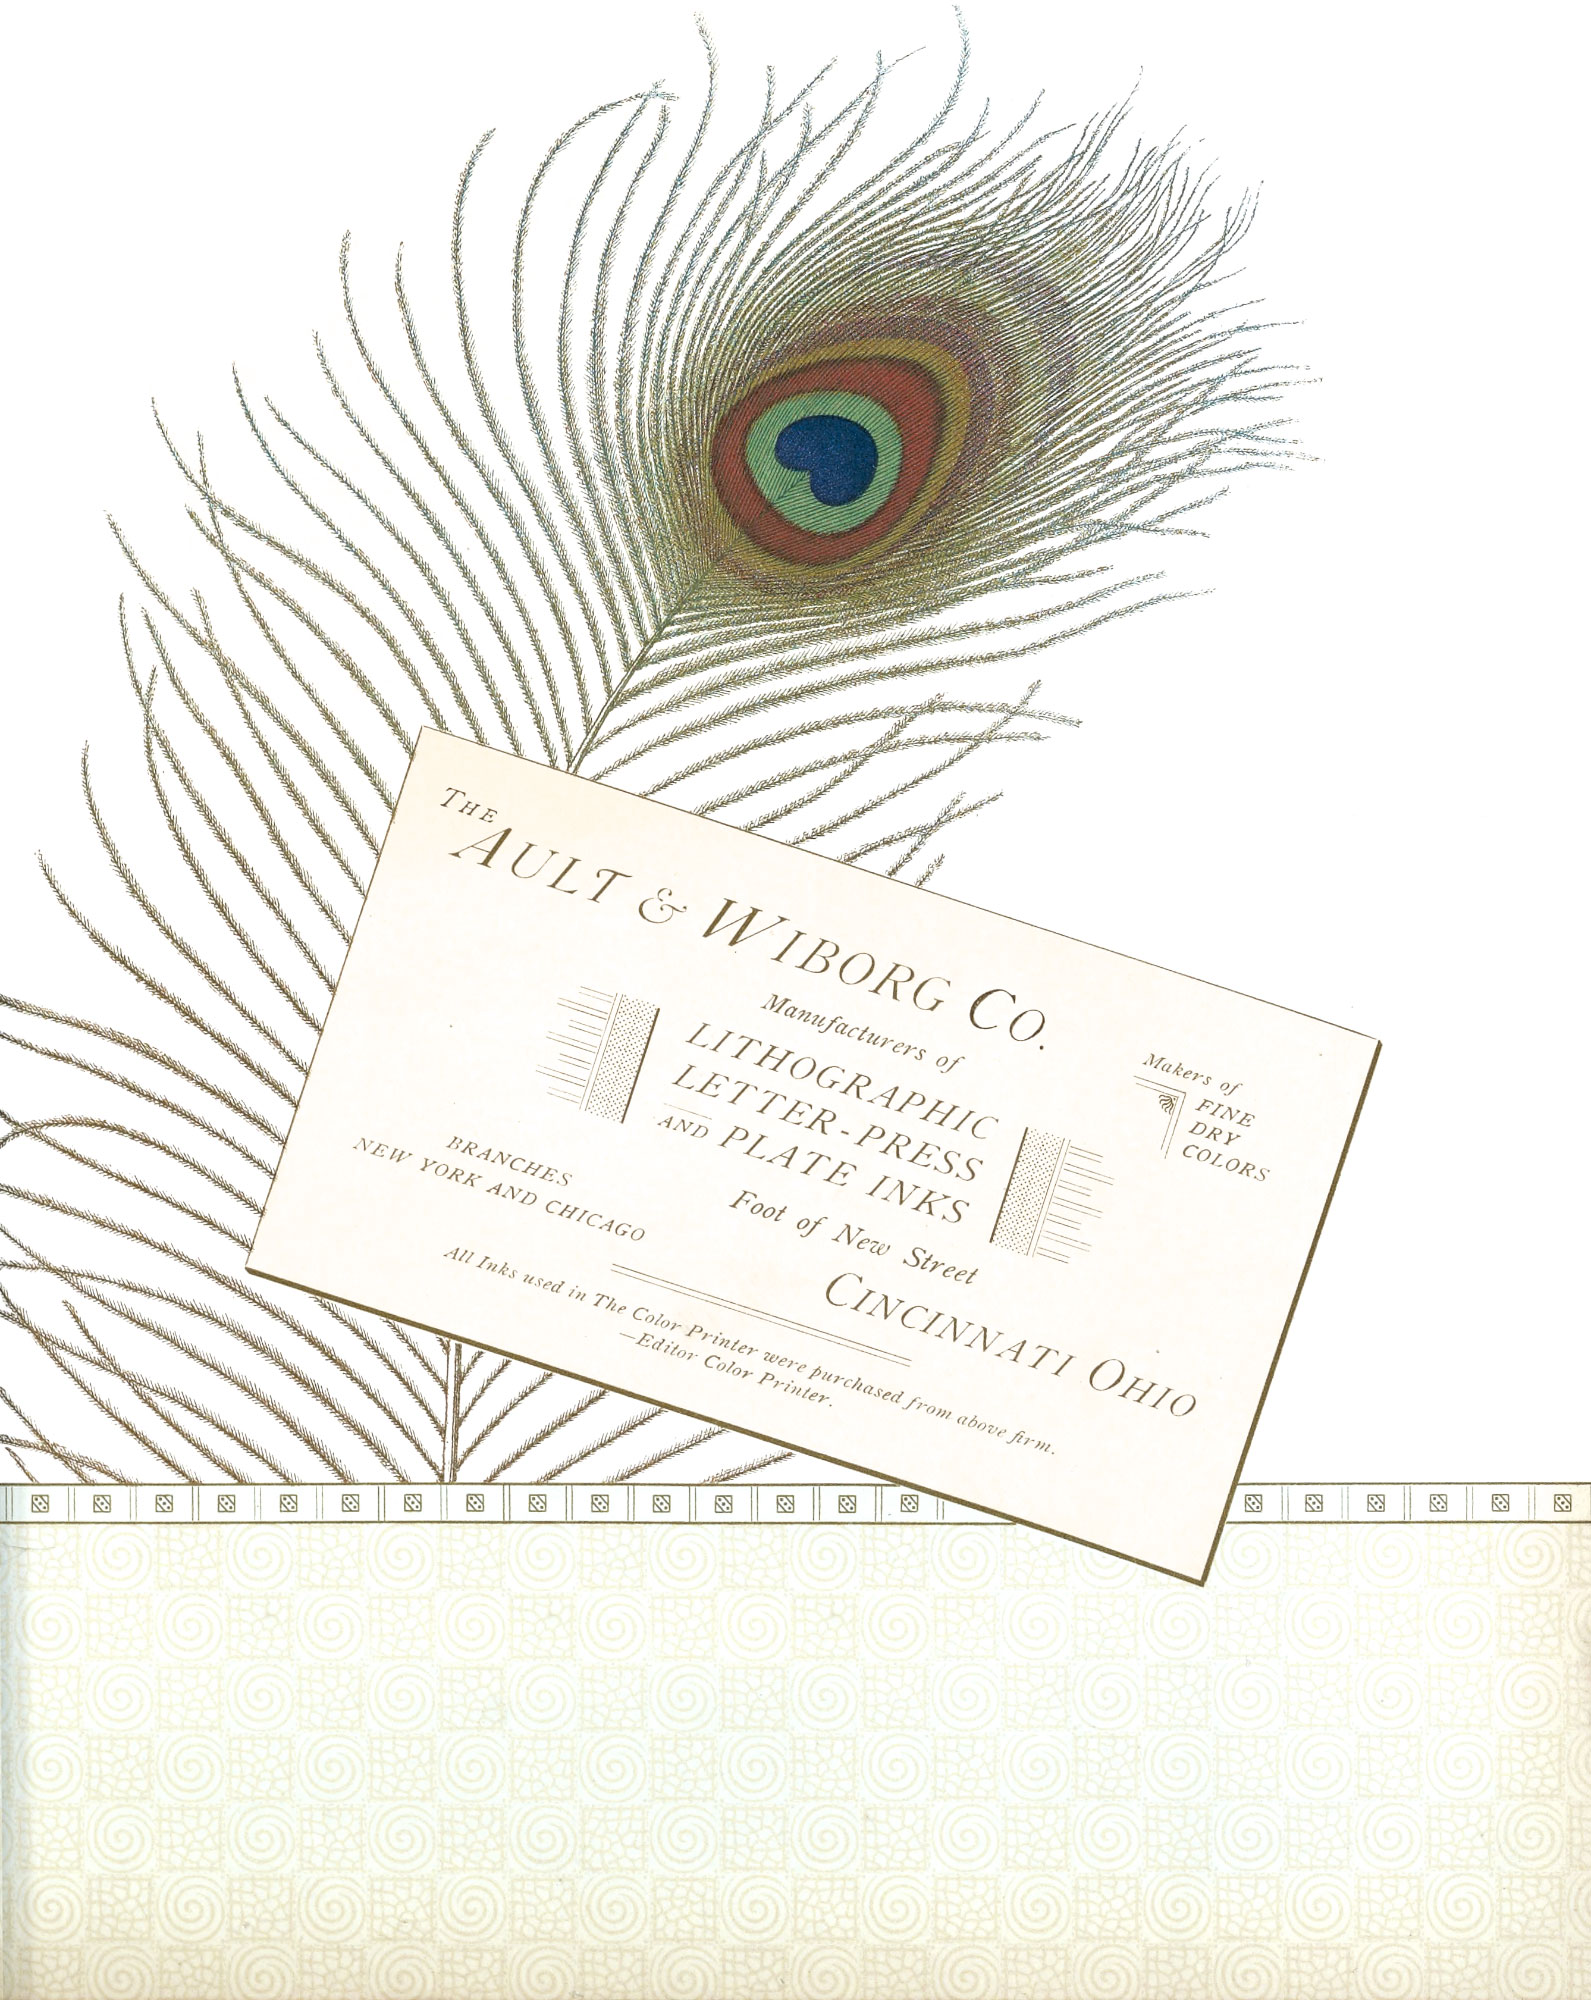 Advertisement sample showing a business card and peacock feather